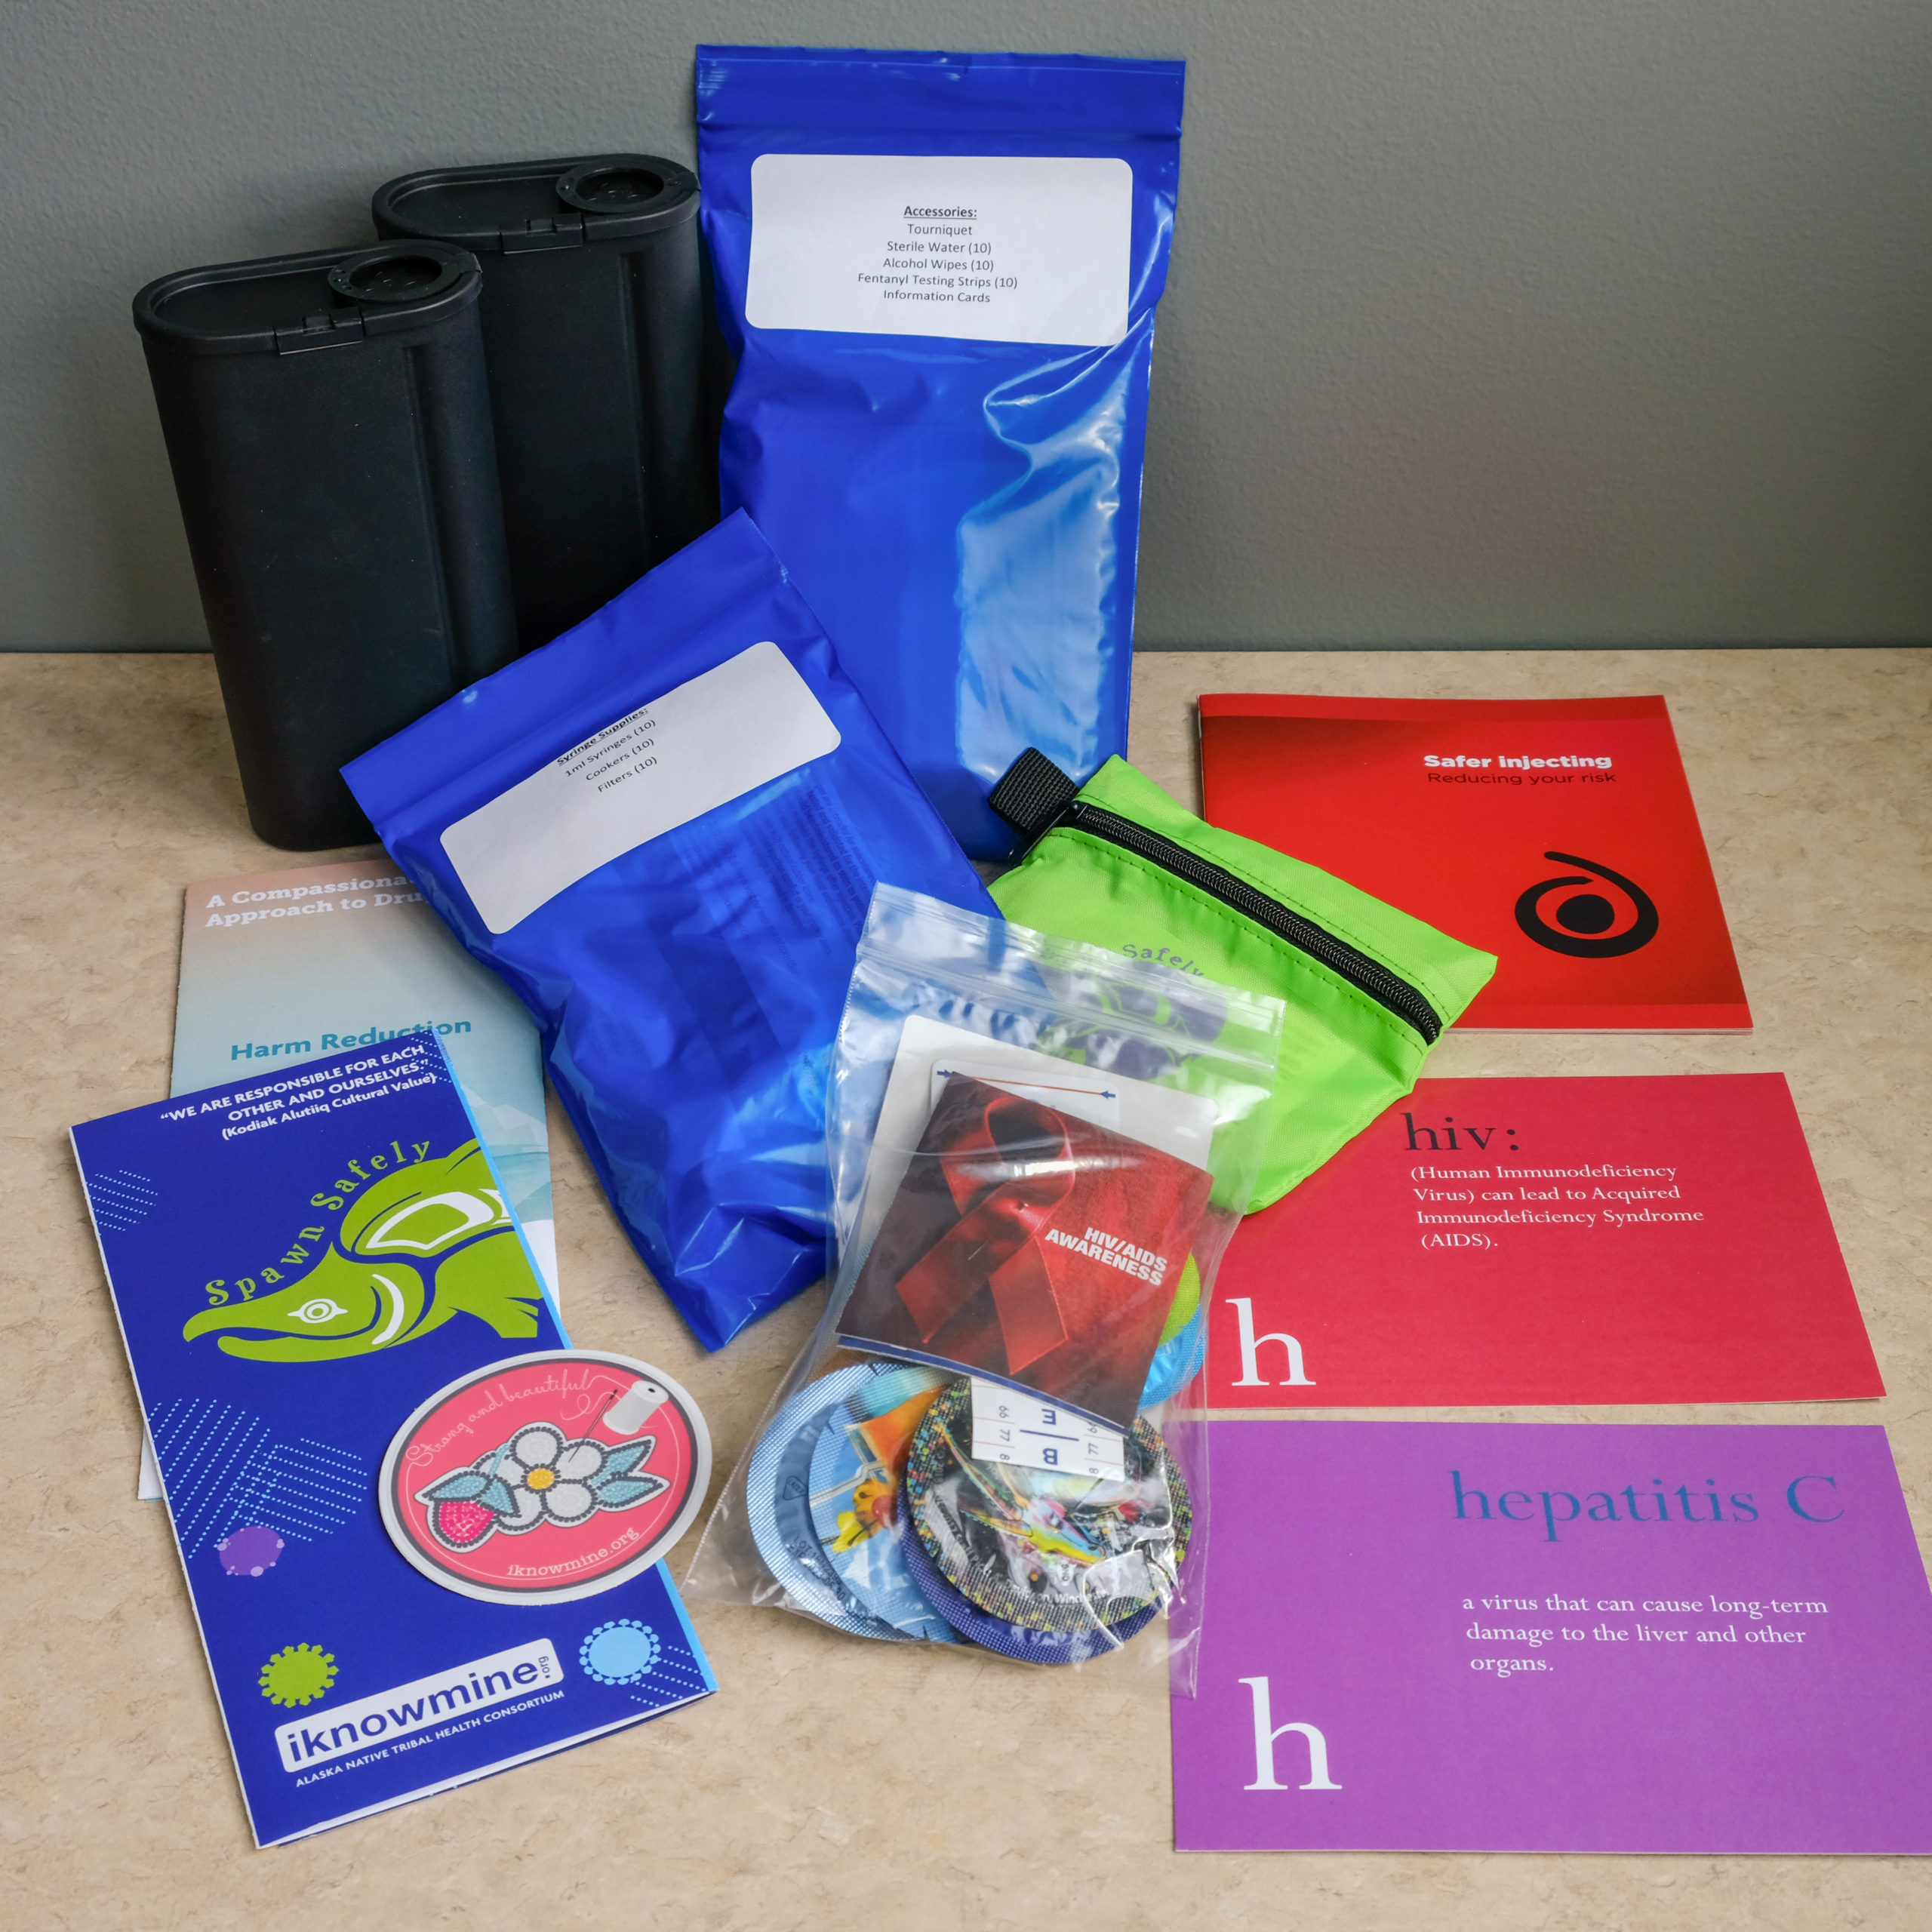 Harm Reduction Safer Injection Kit - iknowmine